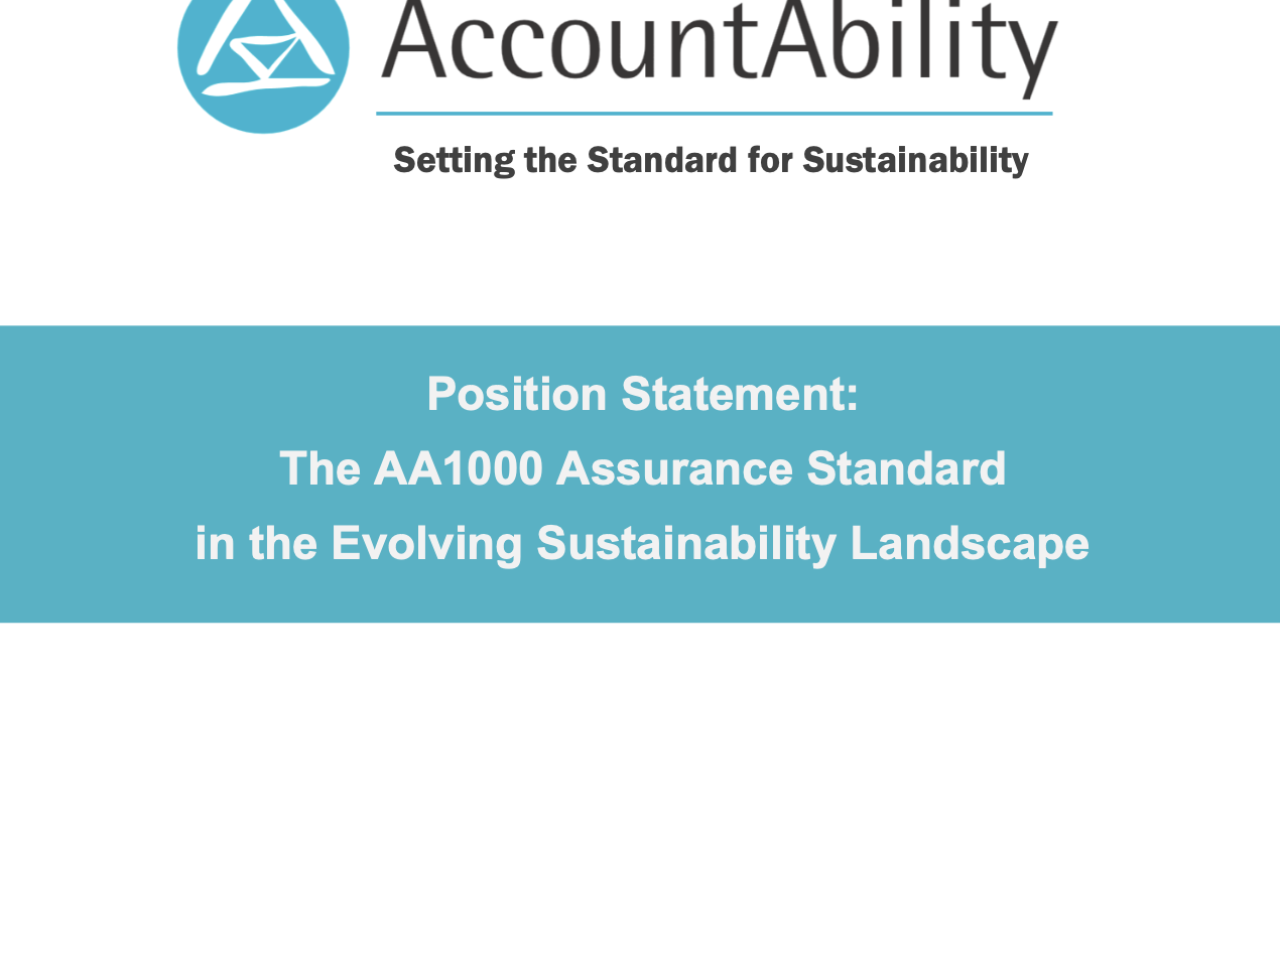 AccountAbility Position Statement